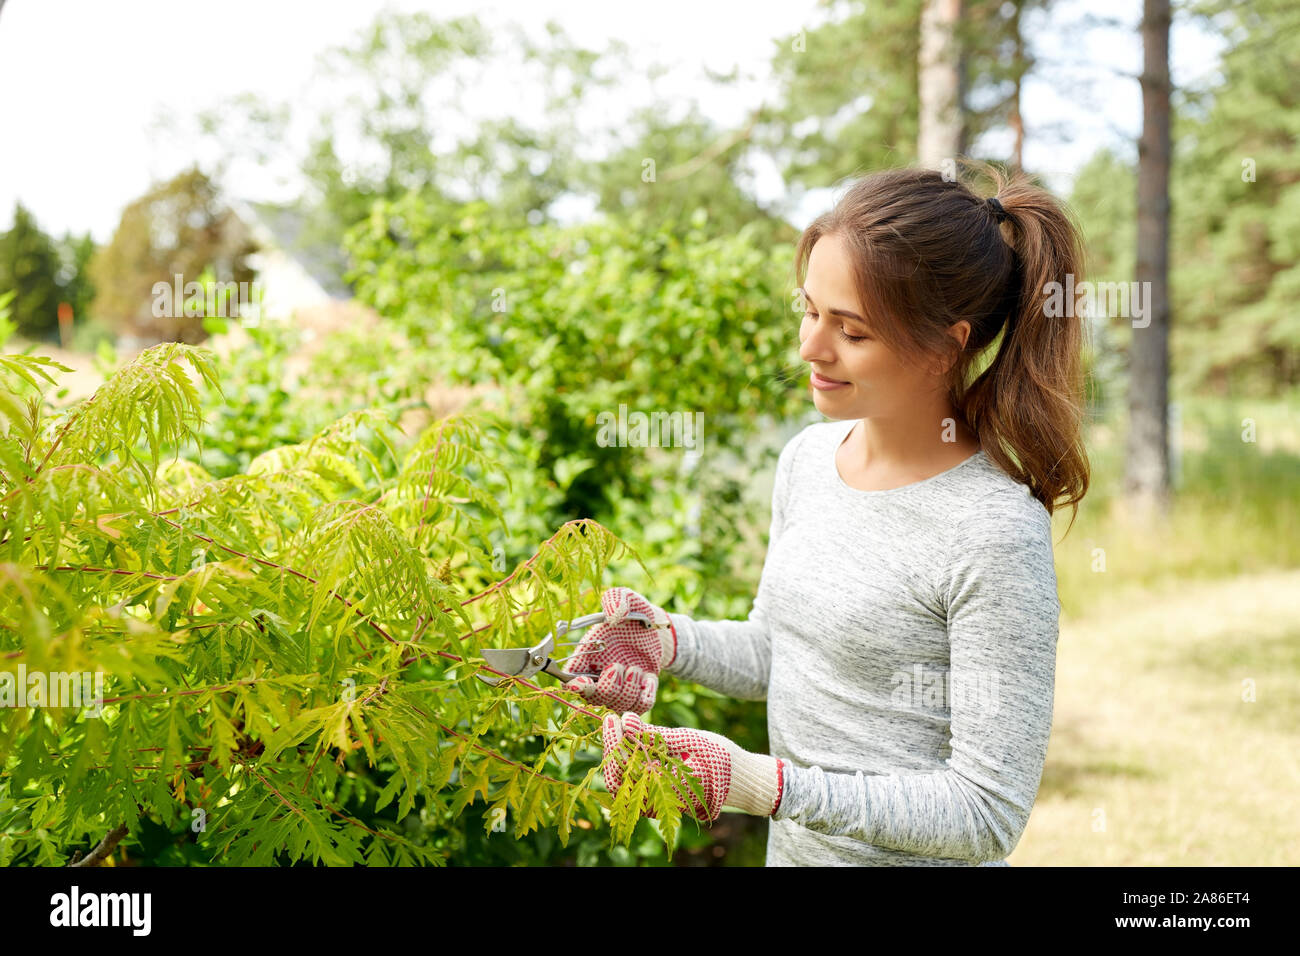 woman with pruner cutting bushes at summer garden Stock Photo